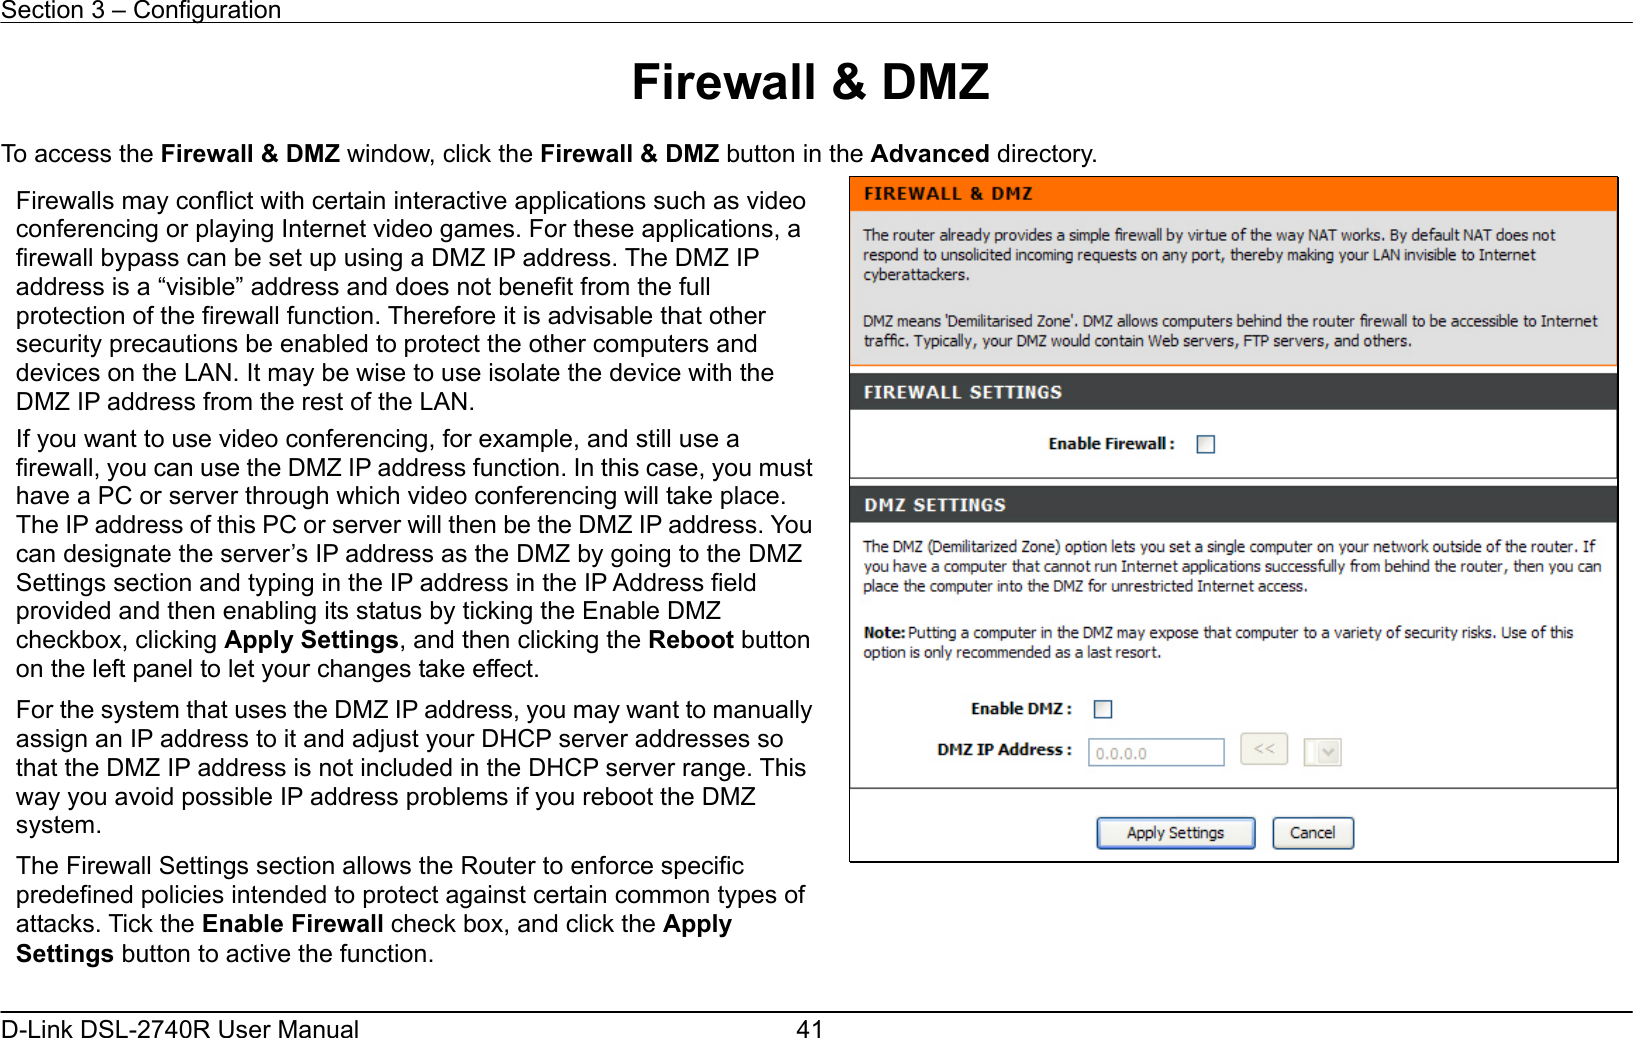 Section 3 – Configuration   D-Link DSL-2740R User Manual  41Firewall &amp; DMZ  To access the Firewall &amp; DMZ window, click the Firewall &amp; DMZ button in the Advanced directory.       Firewalls may conflict with certain interactive applications such as video conferencing or playing Internet video games. For these applications, a firewall bypass can be set up using a DMZ IP address. The DMZ IP address is a “visible” address and does not benefit from the full protection of the firewall function. Therefore it is advisable that other security precautions be enabled to protect the other computers and devices on the LAN. It may be wise to use isolate the device with the DMZ IP address from the rest of the LAN. If you want to use video conferencing, for example, and still use a firewall, you can use the DMZ IP address function. In this case, you musthave a PC or server through which video conferencing will take place. The IP address of this PC or server will then be the DMZ IP address. You can designate the server’s IP address as the DMZ by going to the DMZ Settings section and typing in the IP address in the IP Address field provided and then enabling its status by ticking the Enable DMZ checkbox, clicking Apply Settings, and then clicking the Reboot button on the left panel to let your changes take effect. For the system that uses the DMZ IP address, you may want to manuallyassign an IP address to it and adjust your DHCP server addresses so that the DMZ IP address is not included in the DHCP server range. This way you avoid possible IP address problems if you reboot the DMZ system. The Firewall Settings section allows the Router to enforce specific predefined policies intended to protect against certain common types of attacks. Tick the Enable Firewall check box, and click the Apply Settings button to active the function. 